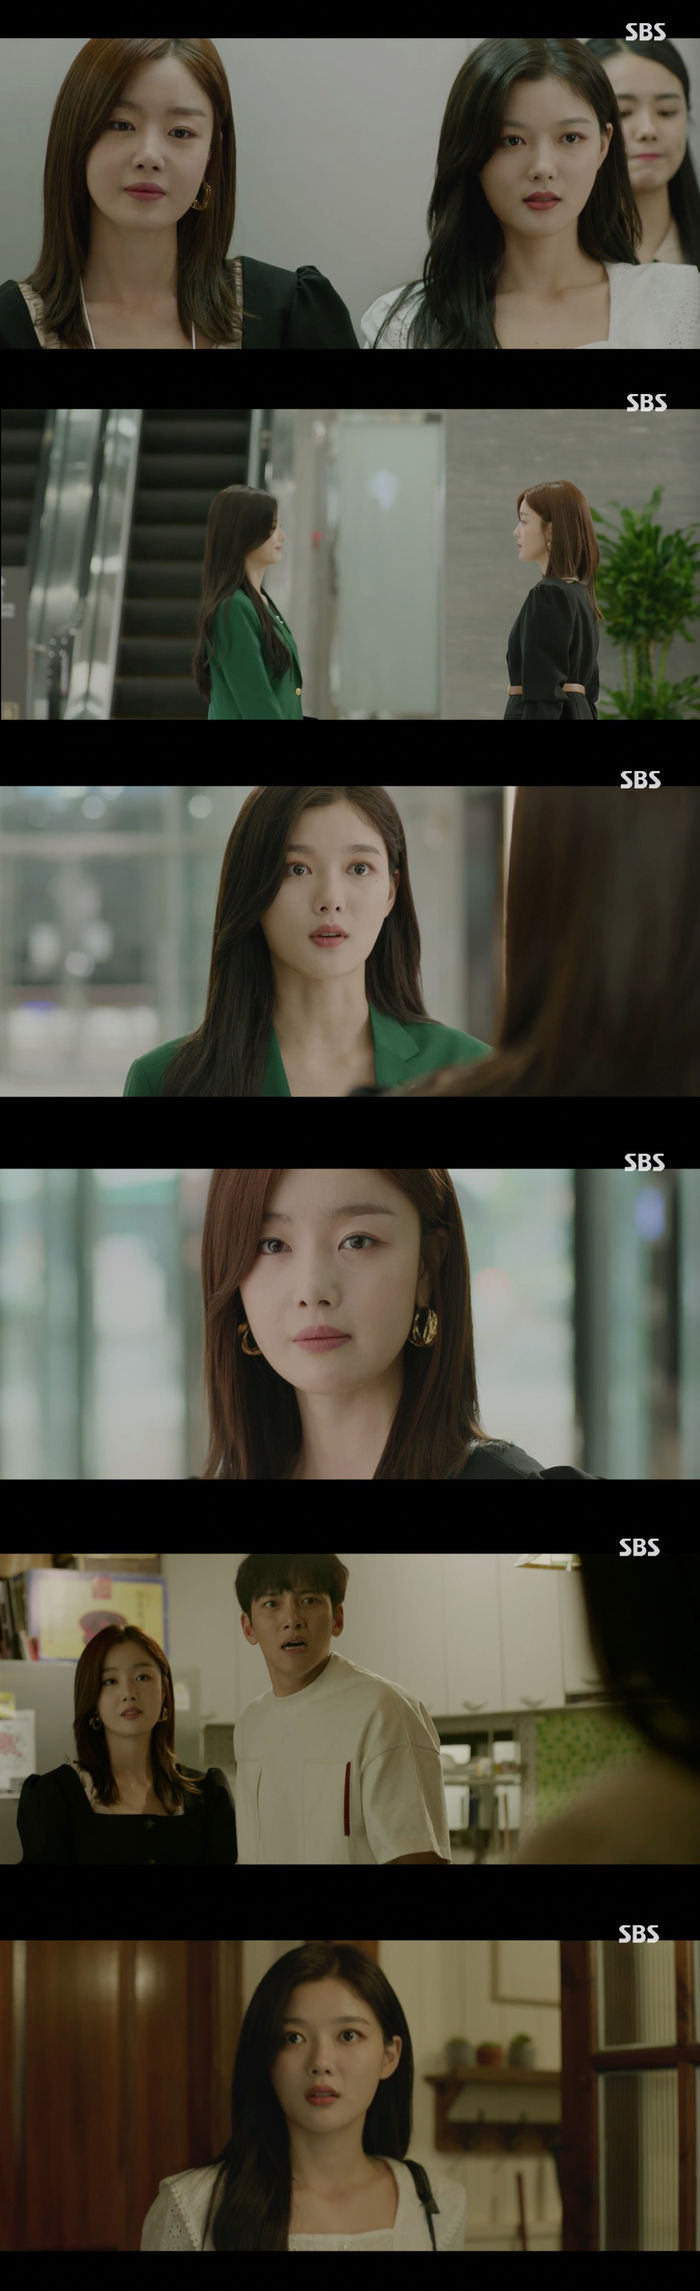  Kim Yoo-jung this is Han Sunhwa in the Provisional Government of the Republic of Kor and had.On the 11th broadcast of SBS Gold review drama convenience store planetin Choi Dae-heon(Ji Chang-wook minutes), and two and a taut fit info: cloud saving-specific(Kim Yoo-jung Min)and flexible care(Han Sunhwa minutes)appear.This day broadcast in the cloud saving is the promotion of excellent employees been selected as the headquarters headed. With a prize musical tickets by injuries received included a Gore by Jo Seung Jun(Road house), the to TV advertising from being seen a lot but this is fun to you?Called asked. And Seung is Yes, I love Yu team, this is the first gig Ive been to be fun.he explained.On this, Choi Dae-heon this flexibility, along with performances havent noticed this rising level was due to the fact that you know me make cloud saving is flexible to caught.He is flexible in at the hospital for me one of the story serious?The store is a pure and good man that sincere becausehe asked.This is a flexible that suits said, and cloud saving are so yourself a good was to say, and Choi Dae-heon, and the wind blew the reason A asked.And flexible, often true, he did,and however Daystar seeds for the life you noand just cut said.This information included a Gore is a point he liked to use and I fall when two minutes in, theres nothing to say that sincerely believed. However no matter how I look at me lying there like,he said. Flexible that for Hyun between me and what happened and all that we two people of the problem. Meddle not,said the right tackle.And then cloud saving is meddle not protest it. Store all how valuable people are not the people that get kicked should be likeand points for a hurt if you cannot see that-likeand flexible to the provocation had.Meanwhile this day, his mind realized the flexibility that Choi Dae-heon to catch for his home was found, and in cloud saving and meet again attracted attention.